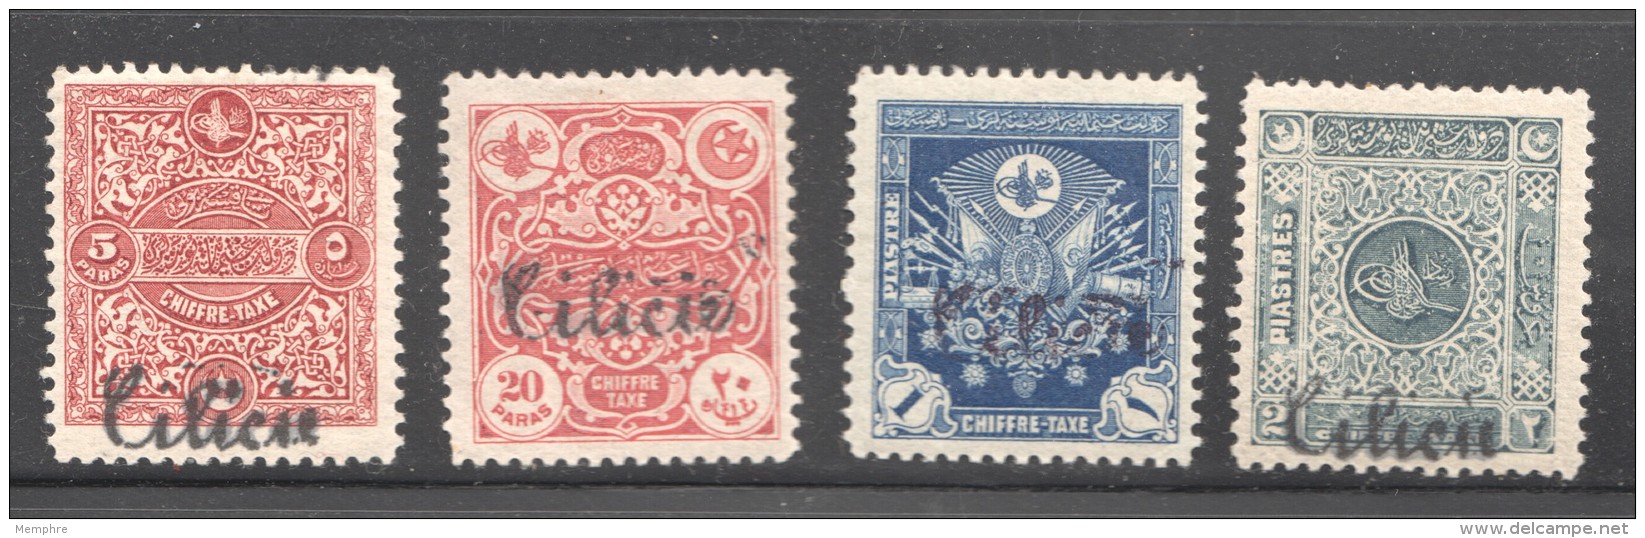 191  Timbre Taxe Turcs  Surcharge Cursive  CILICIE   Taxe  9-12 * - Unused Stamps